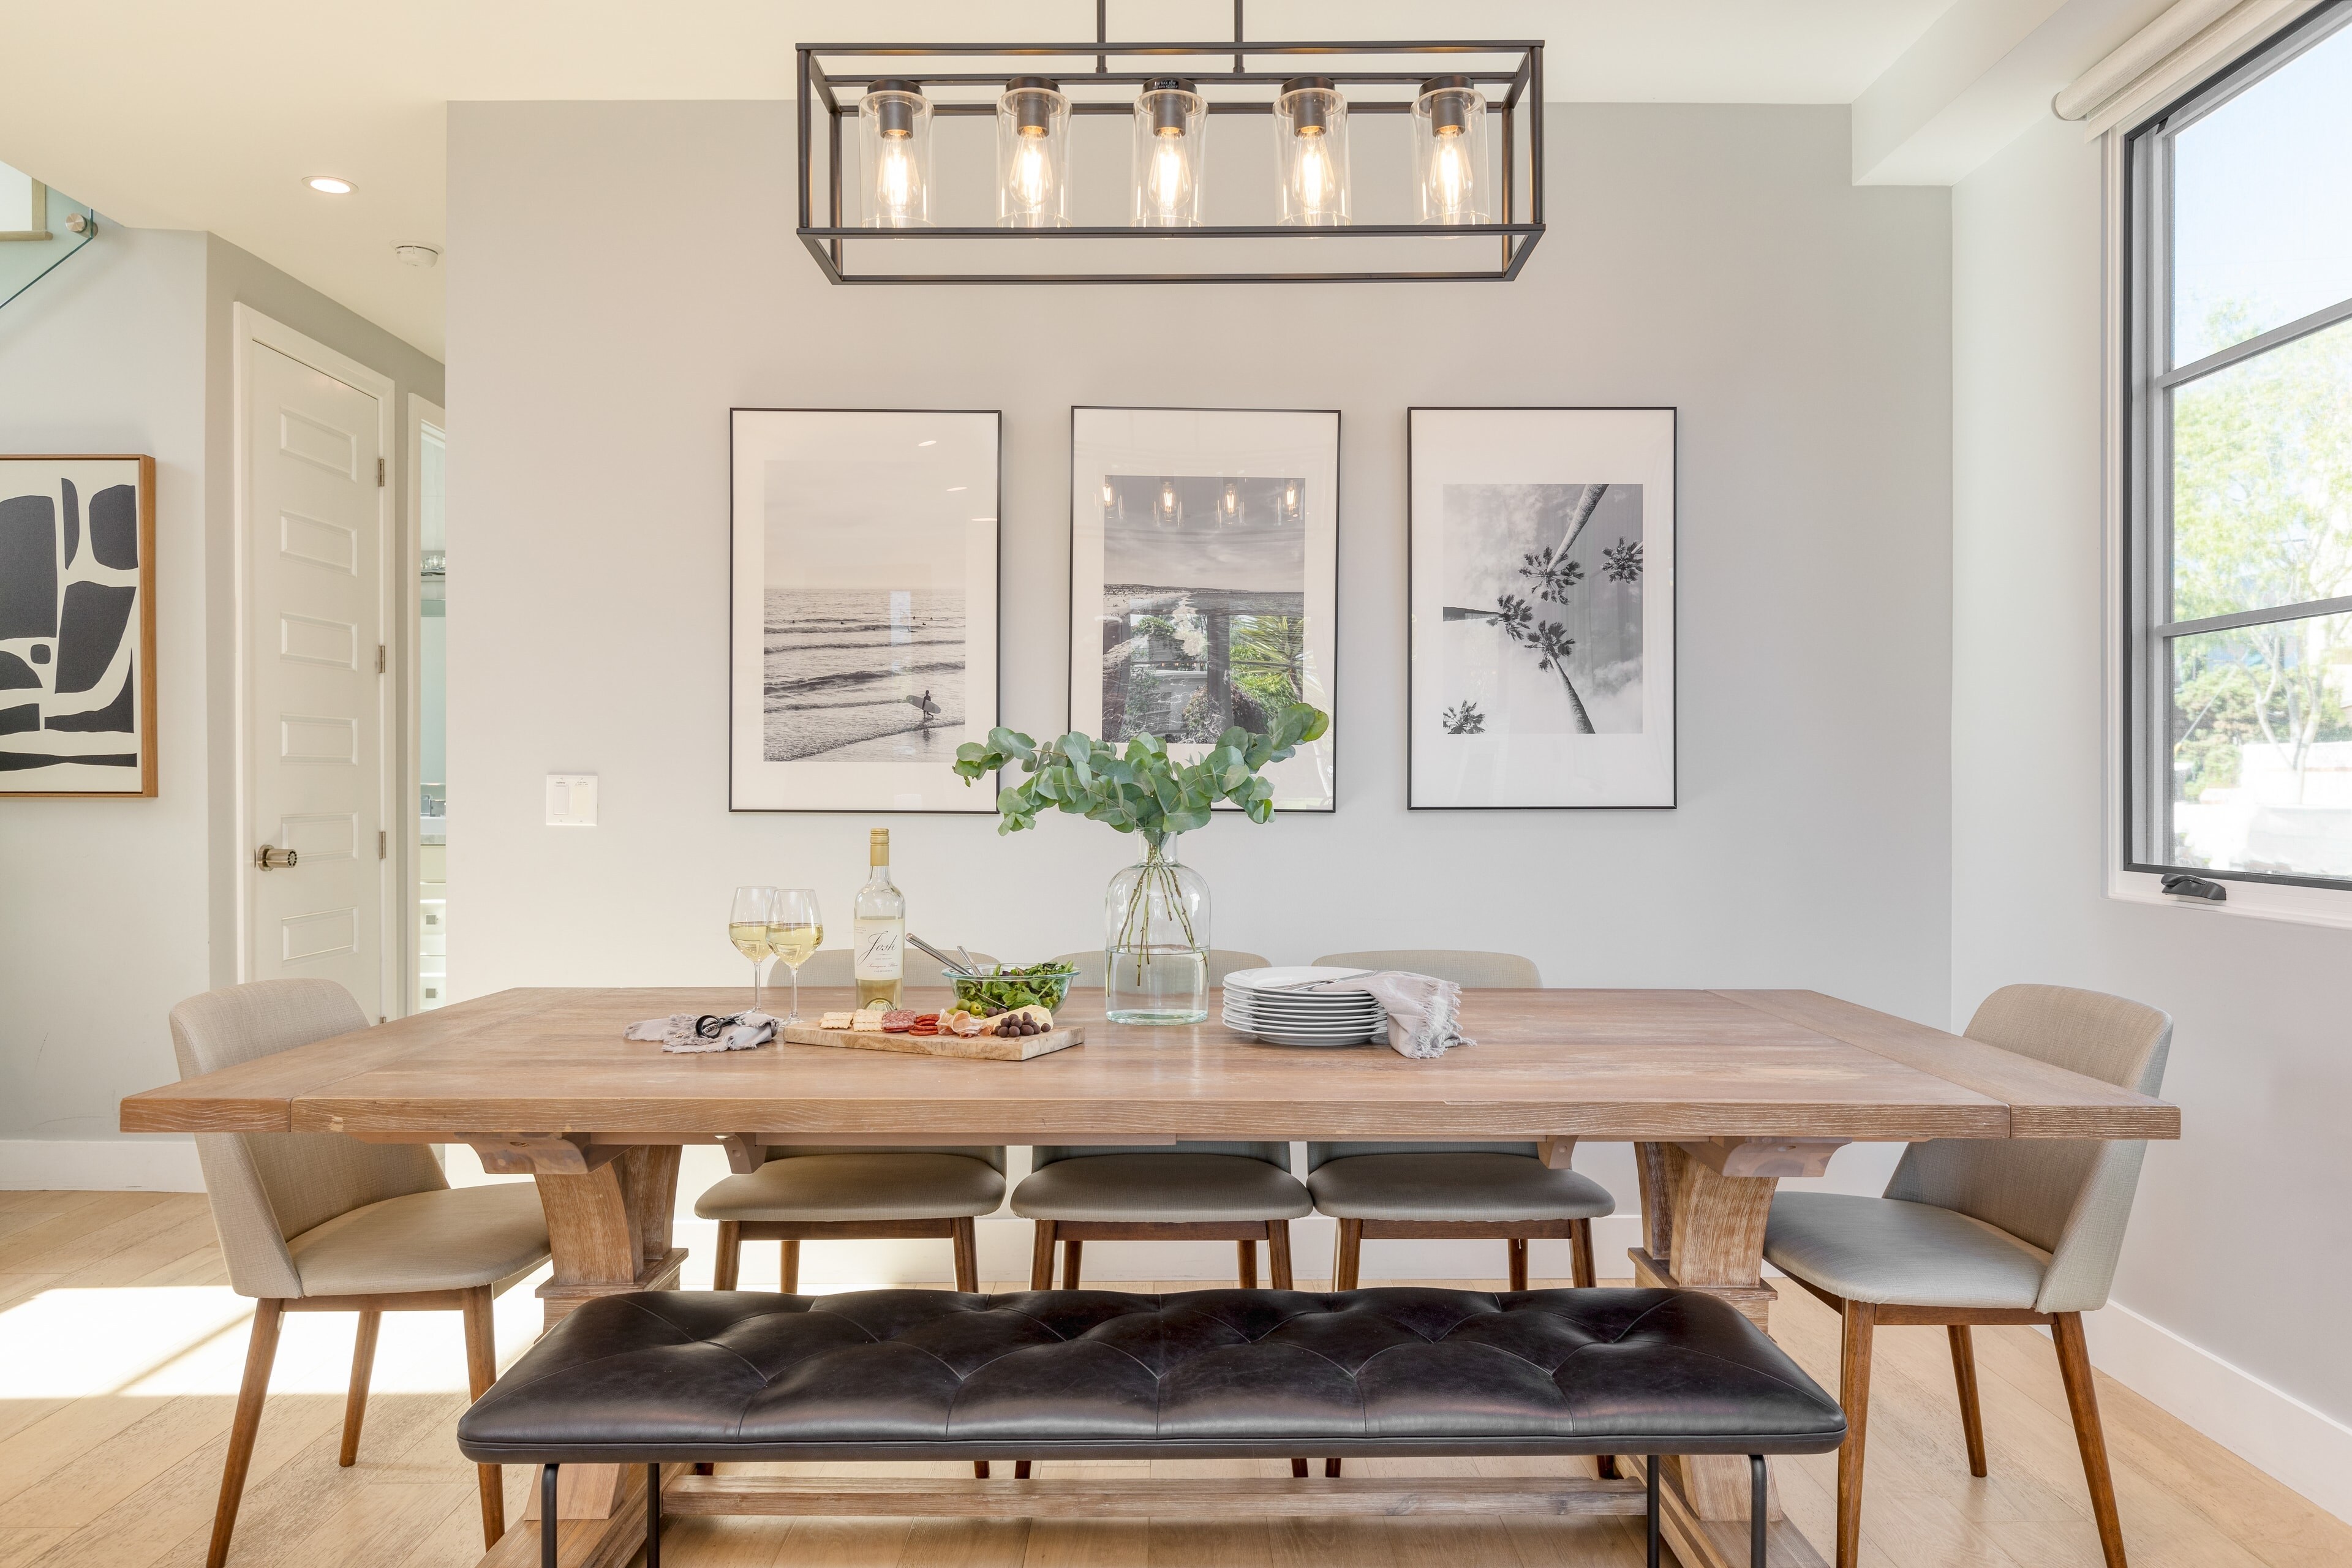 Chic dining area features a mix of traditional and bench seating.